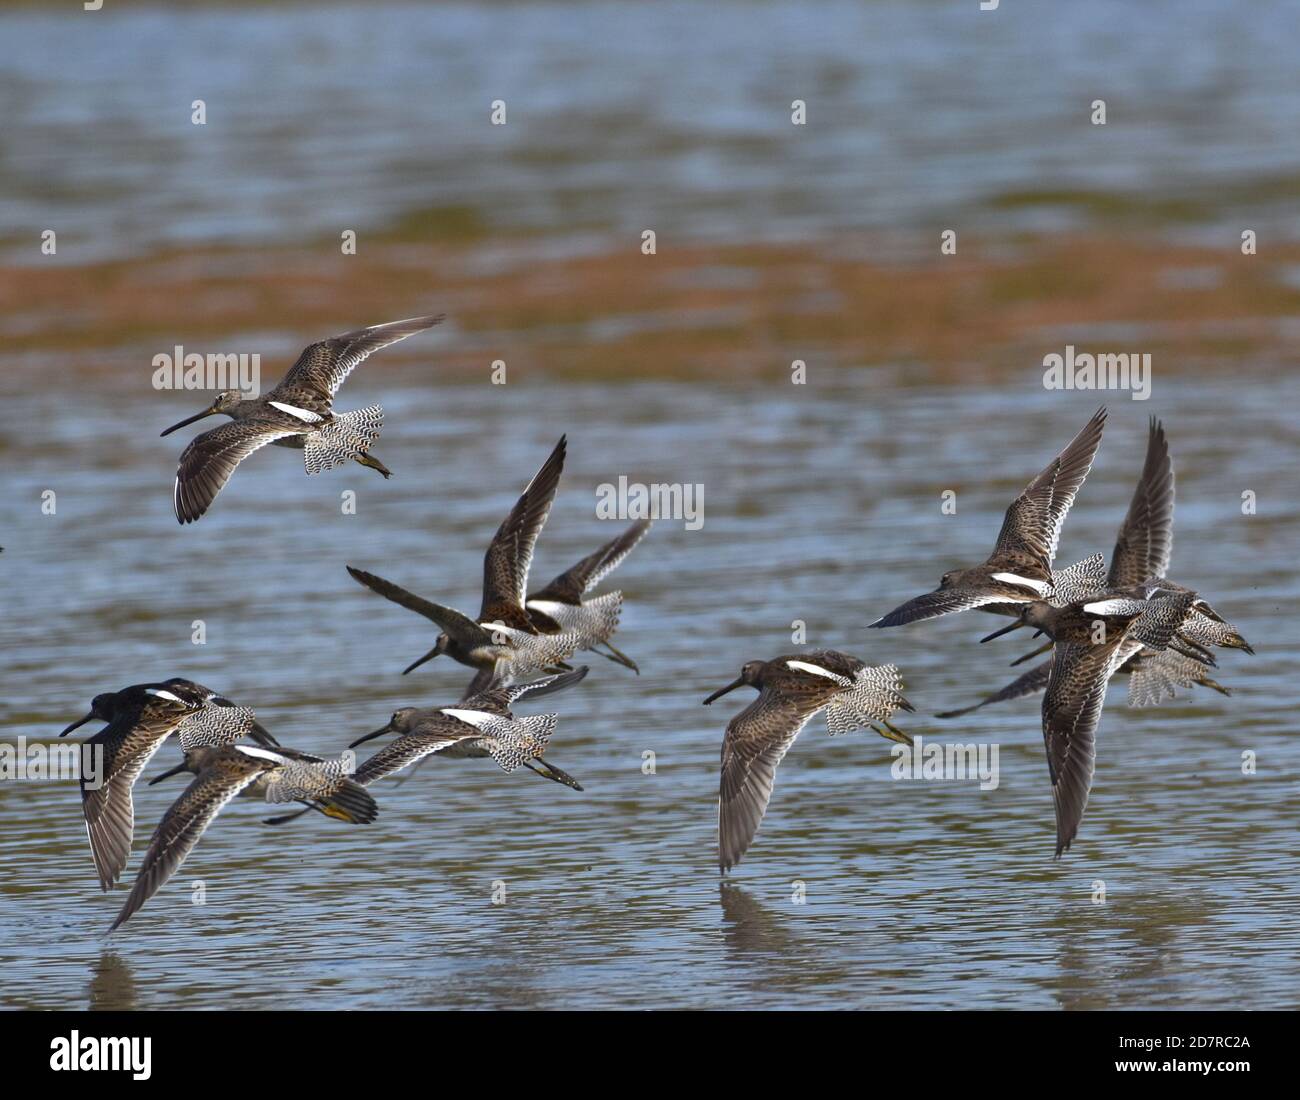 A flock of long-billed dowitchers (Limnodromus scolopaceus) in flight over water on Watsonville Slough in California Stock Photo